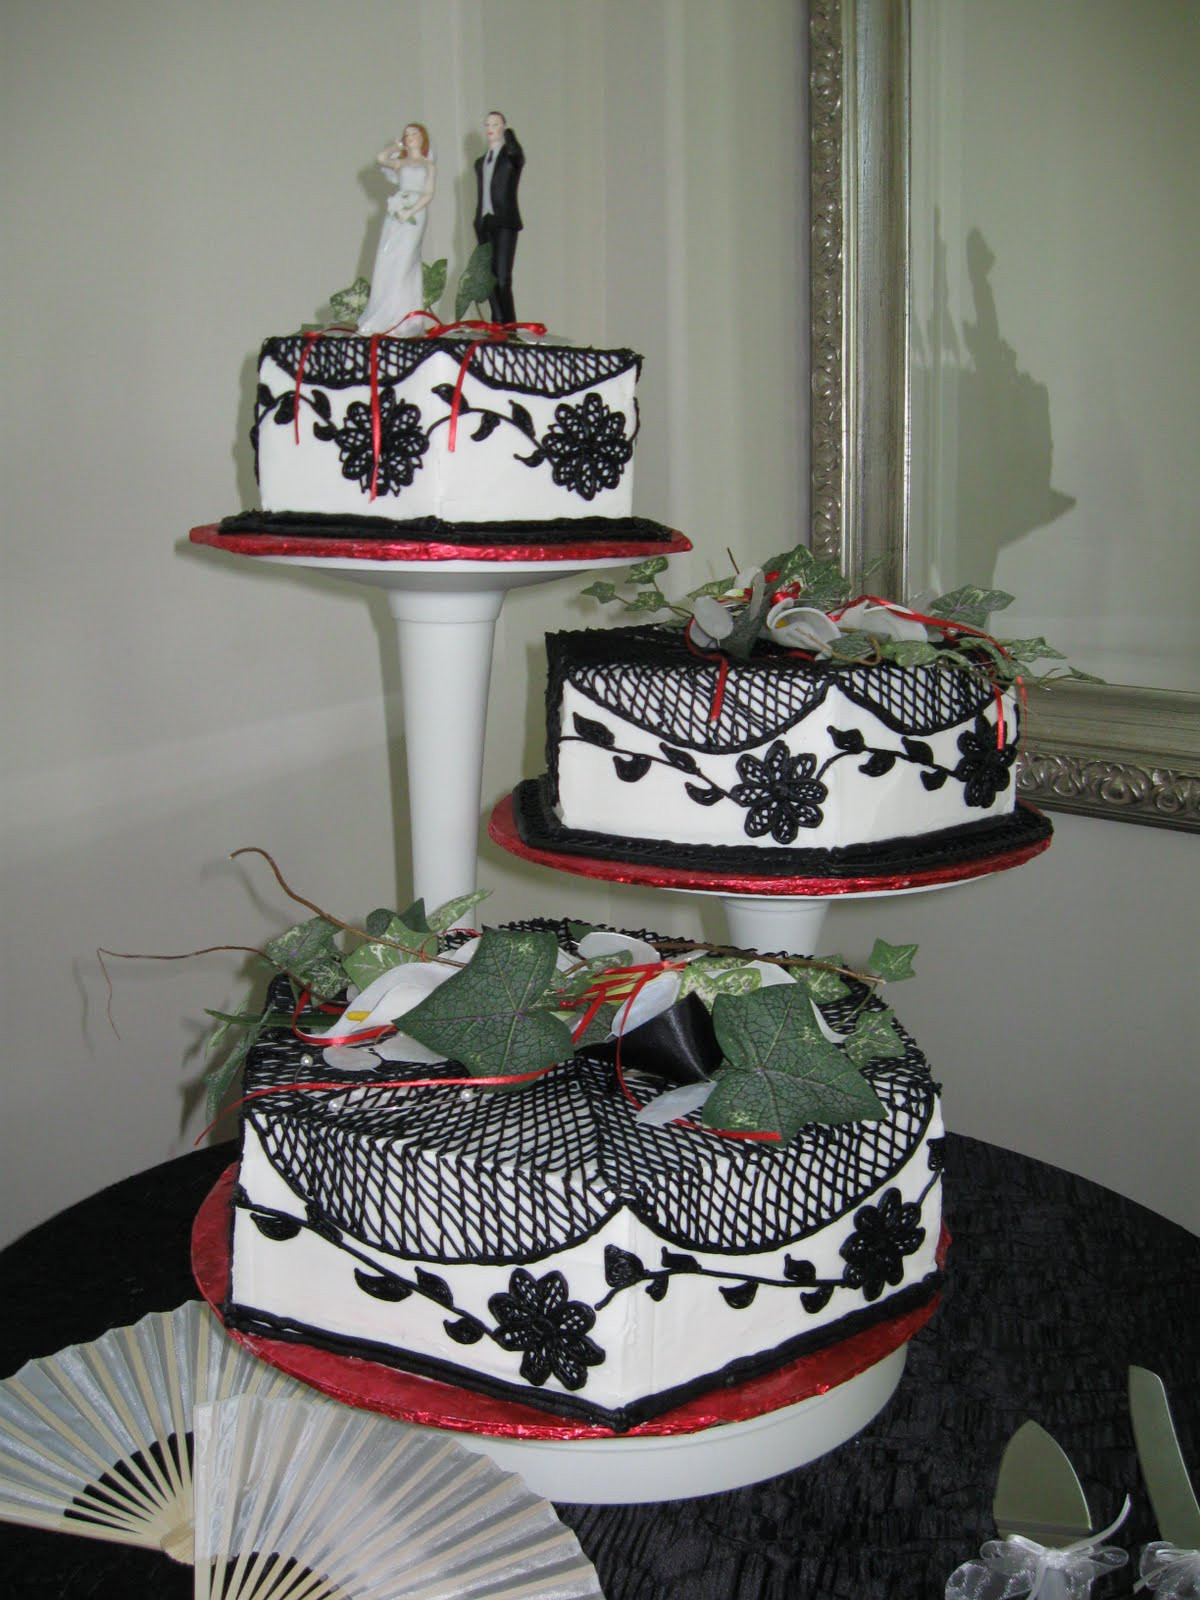 Black White And Red Wedding Cakes
 ChubbyHubbyCakes Black white and red wedding cake